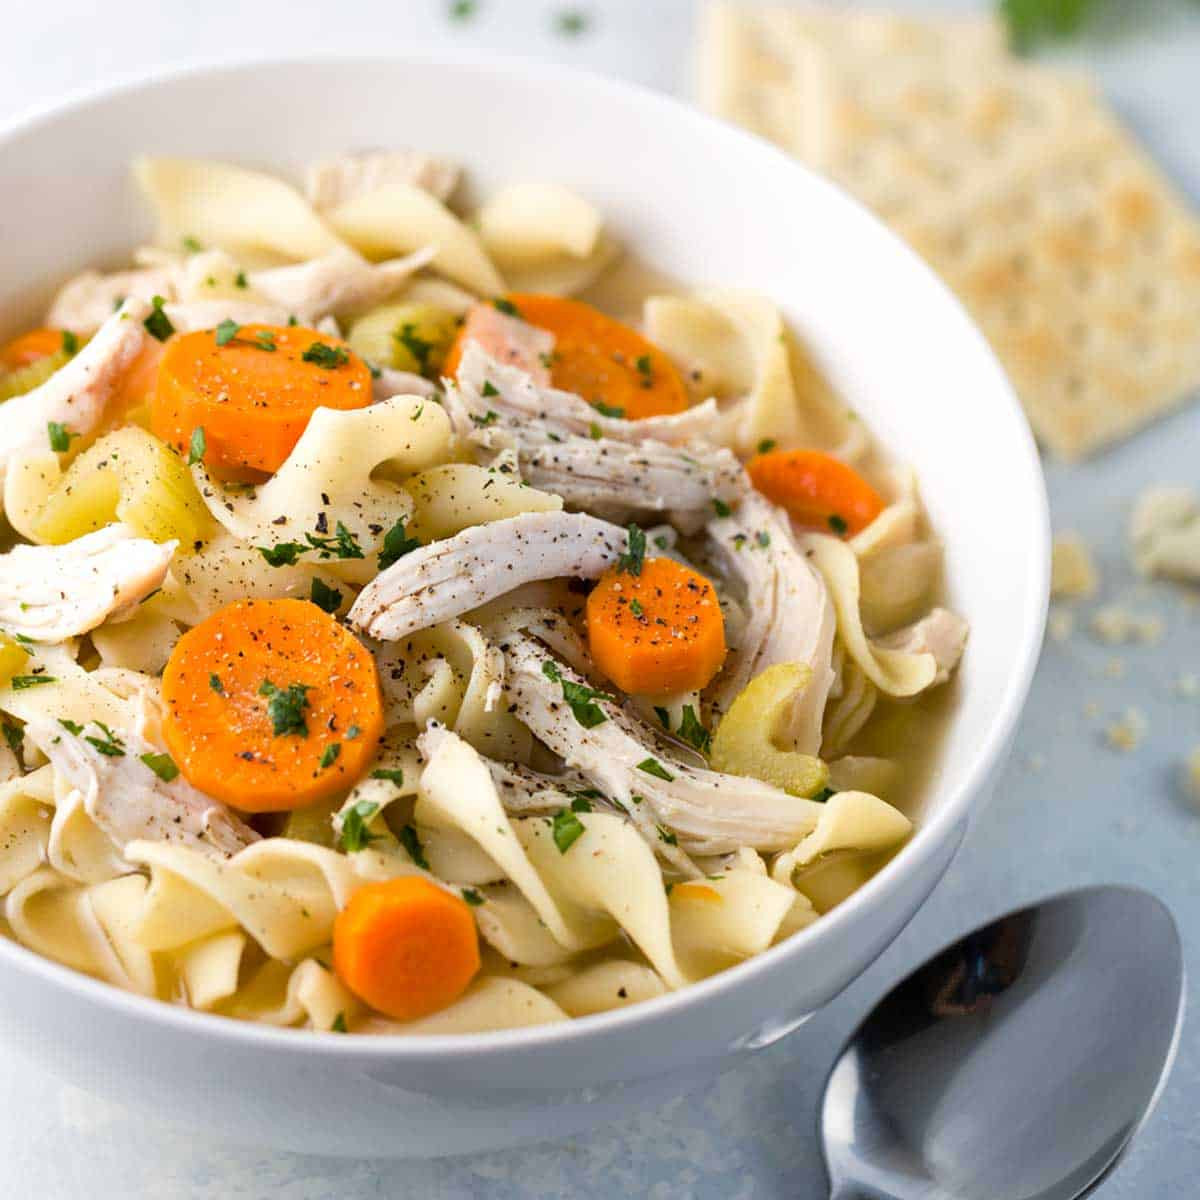 Recipe Chicken Noodle Soup
 Easy Slow Cooker Chicken Noodle Soup Recipe